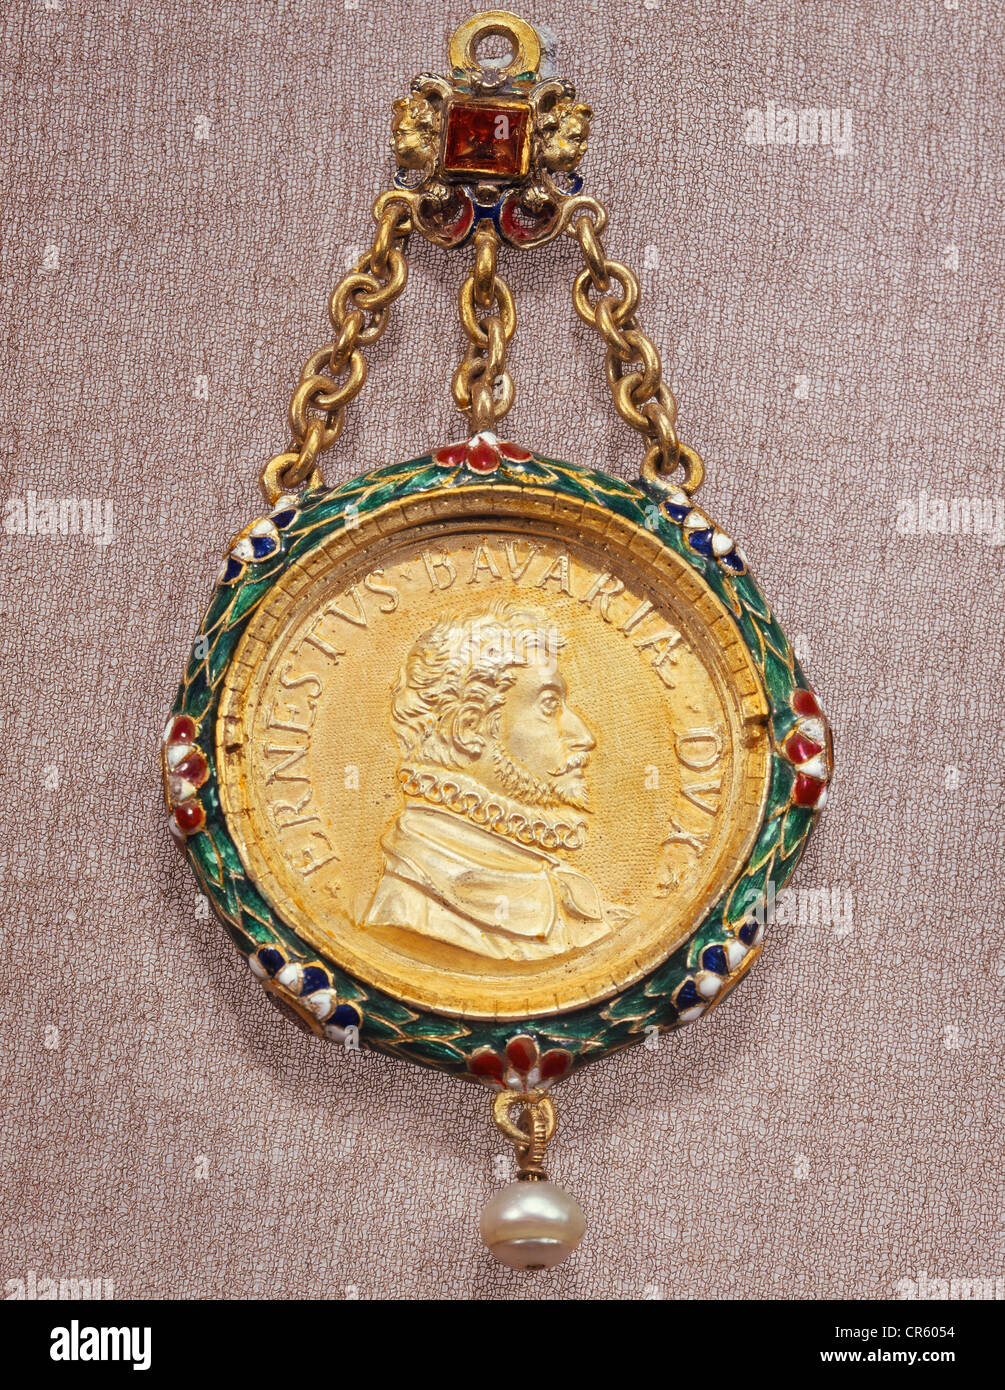 Ernest of Bavaria, 17.12.1554 - 17.2.1612, Archbishopric of Cologne from 1583 to 1612, portrait, side view, medal, 'Gnadenpfennig', gold, cast, enamel, 9.5 cm x 4.8 cm, Munich, 1583, State Coin Collection, Munich, Stock Photo